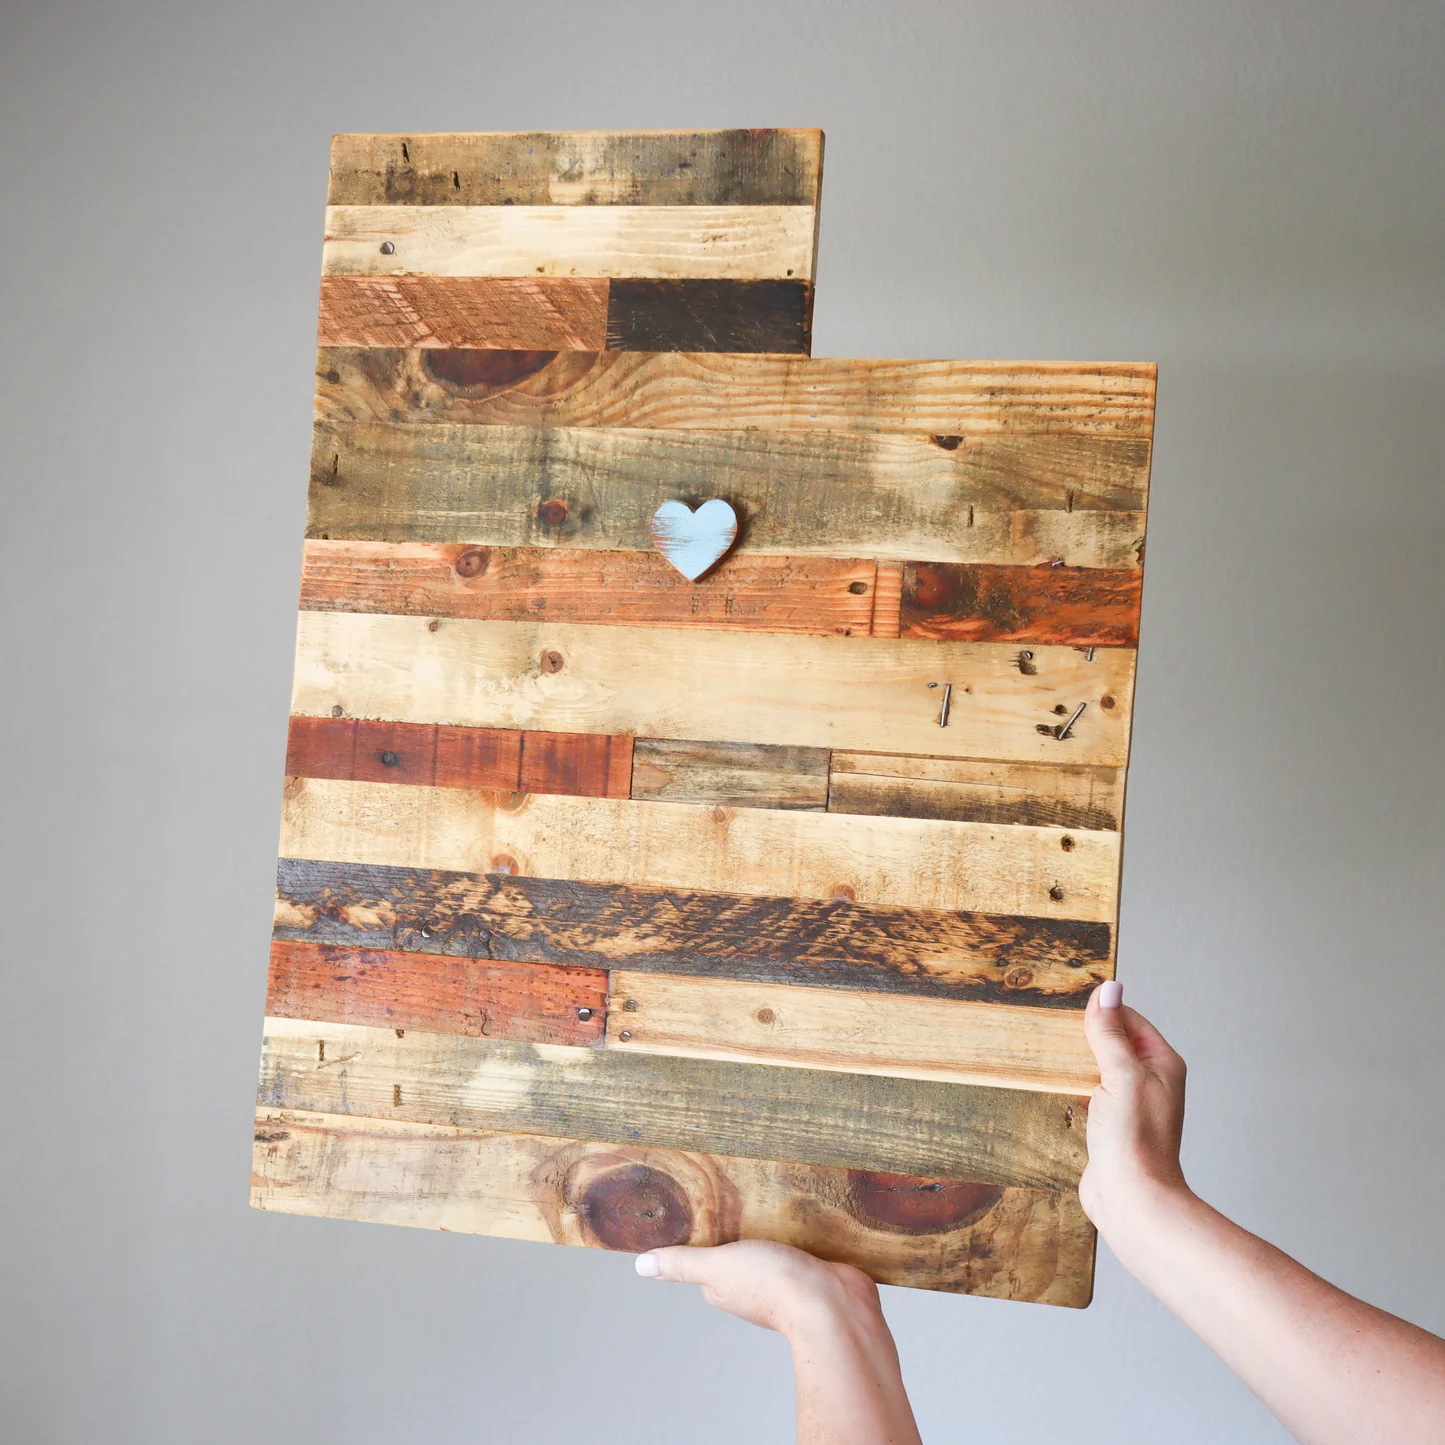 Art made from pallets.